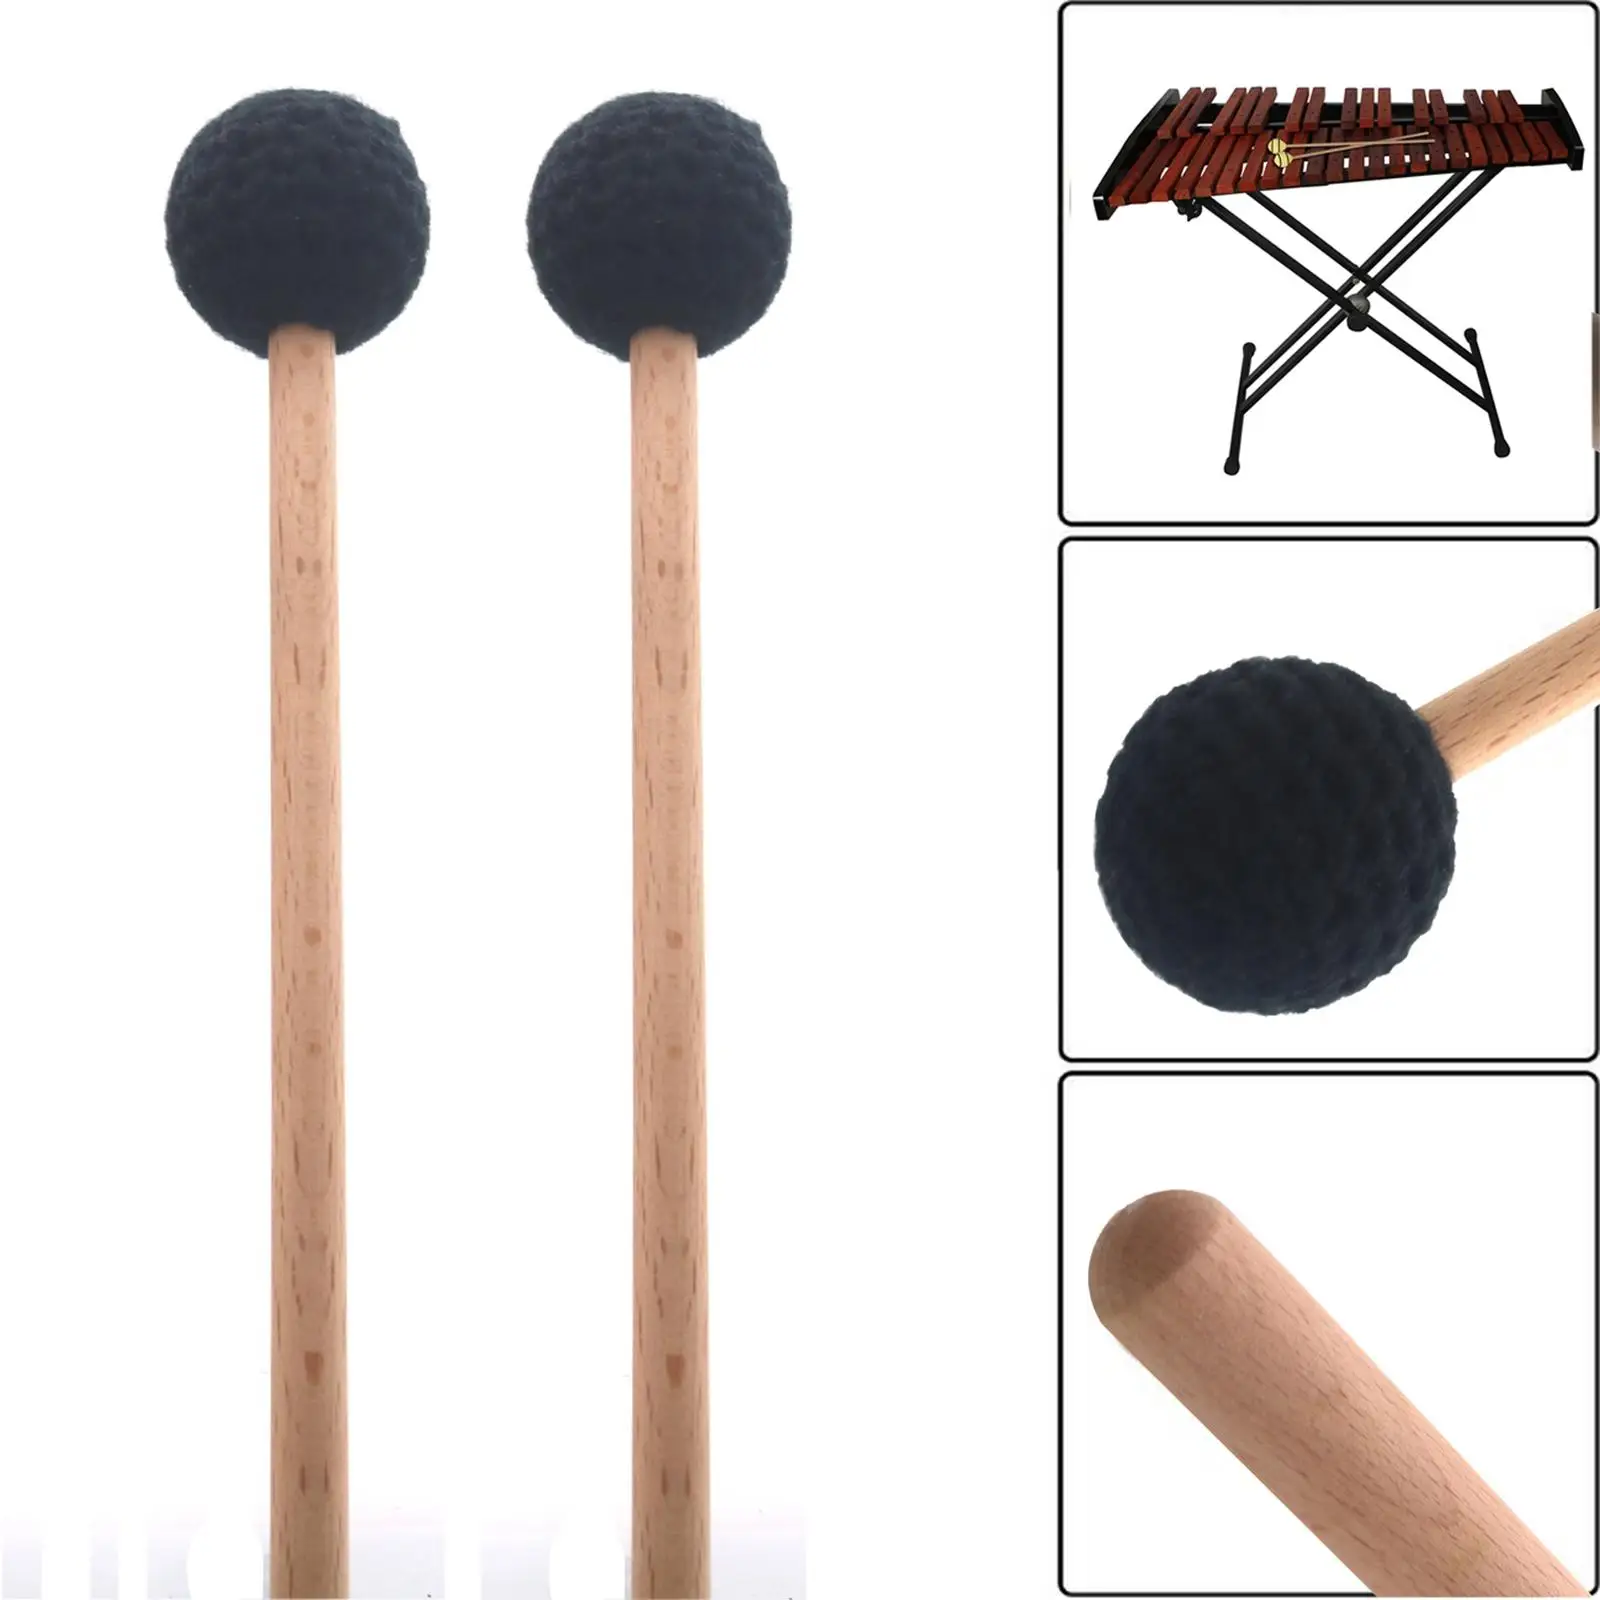 2x Glockenspiel Sticks Percussion Xylophone Bell Mallets for Drummers Xylophone